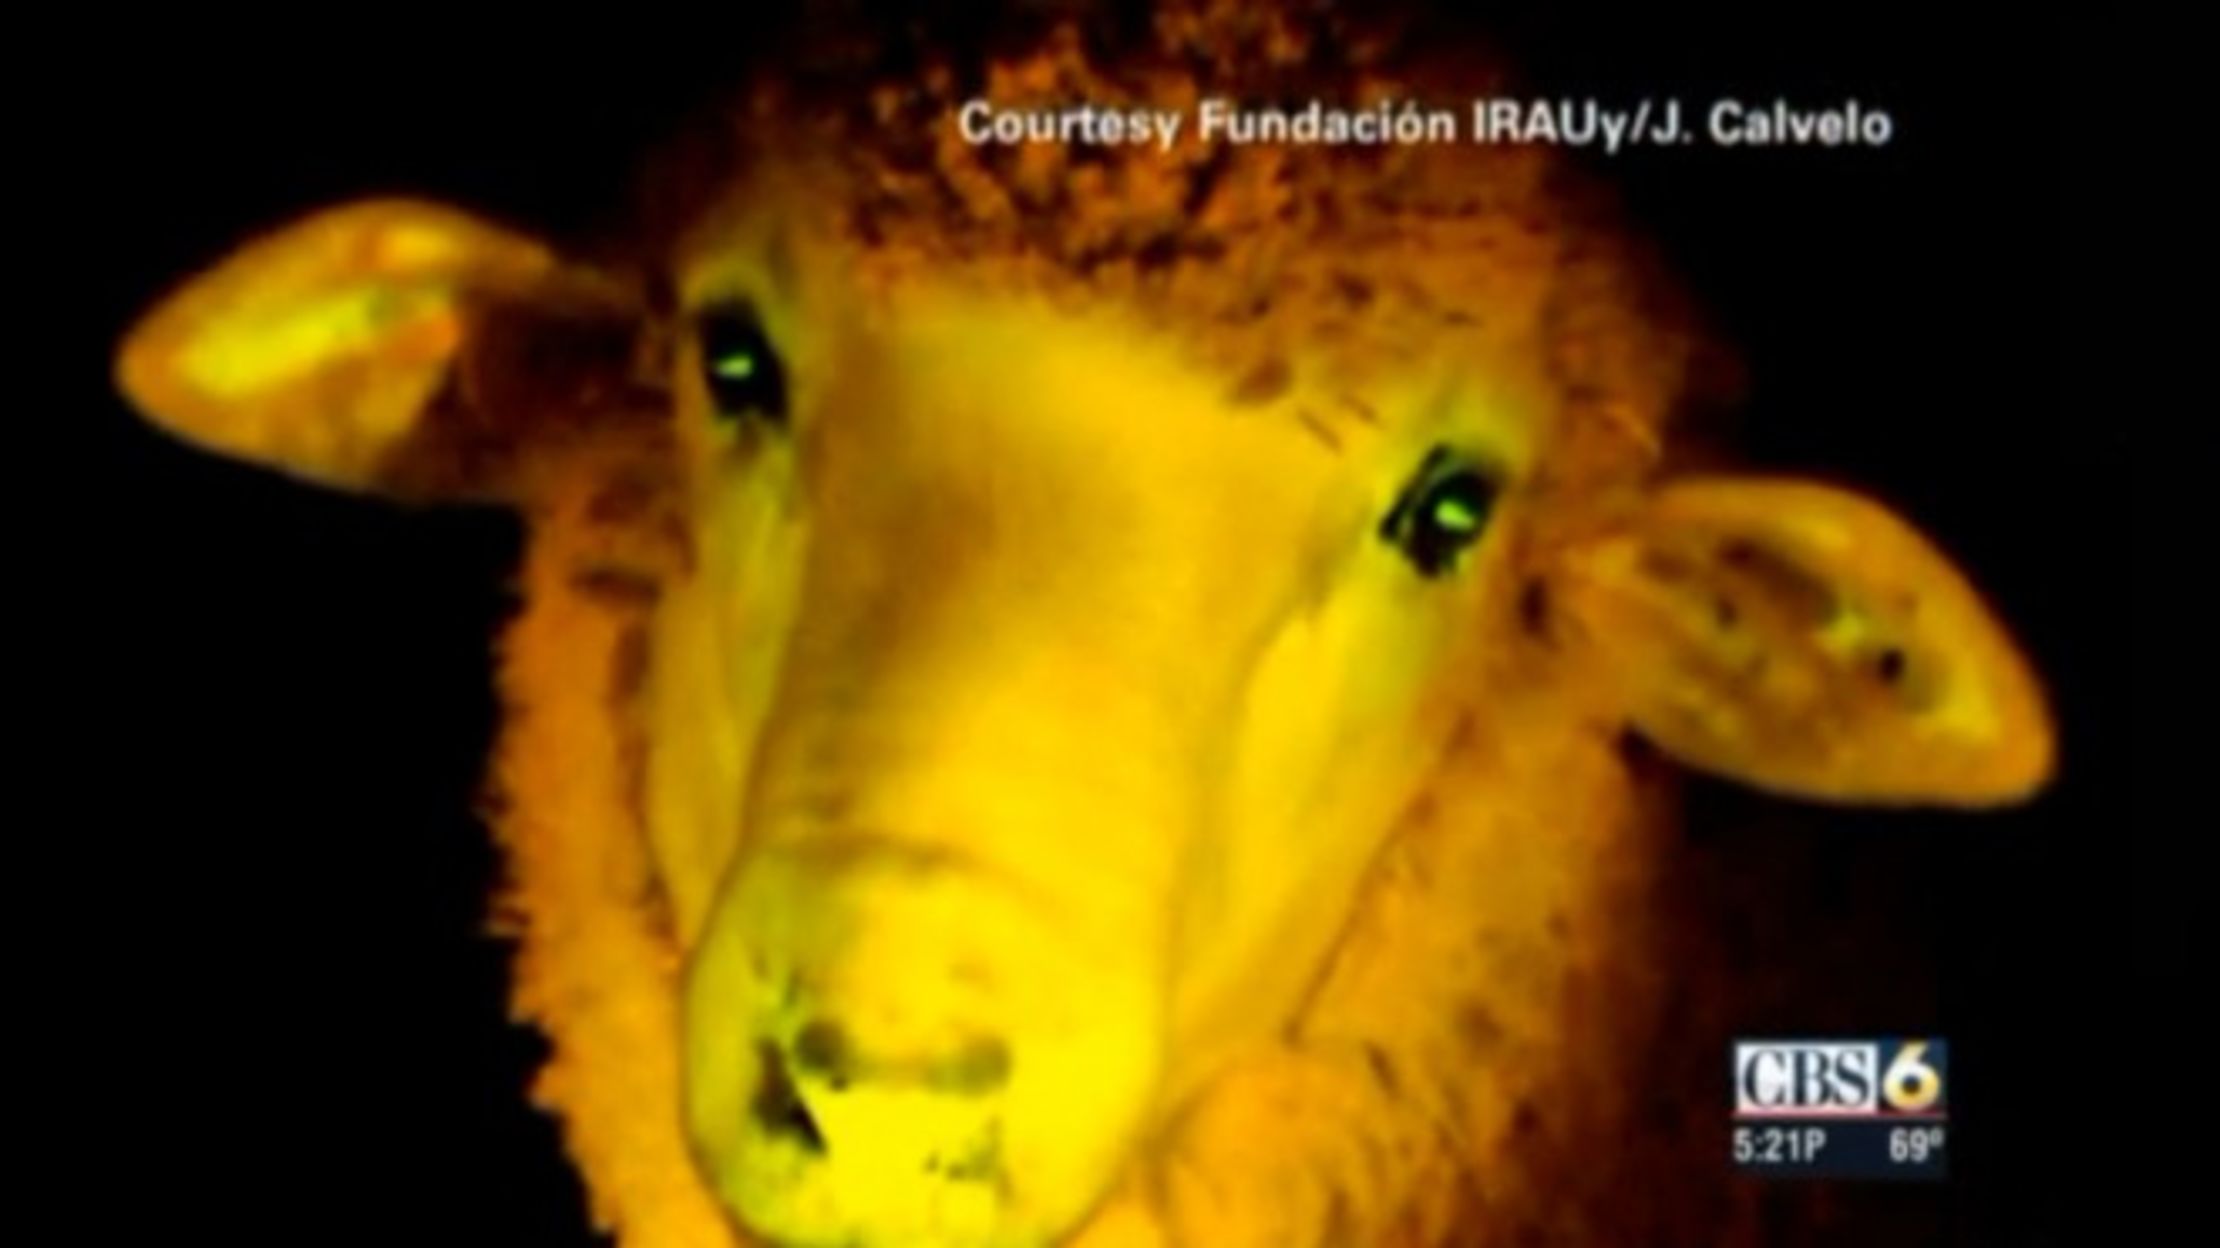 glow in the dark sheep genetically modified at uruguay lab